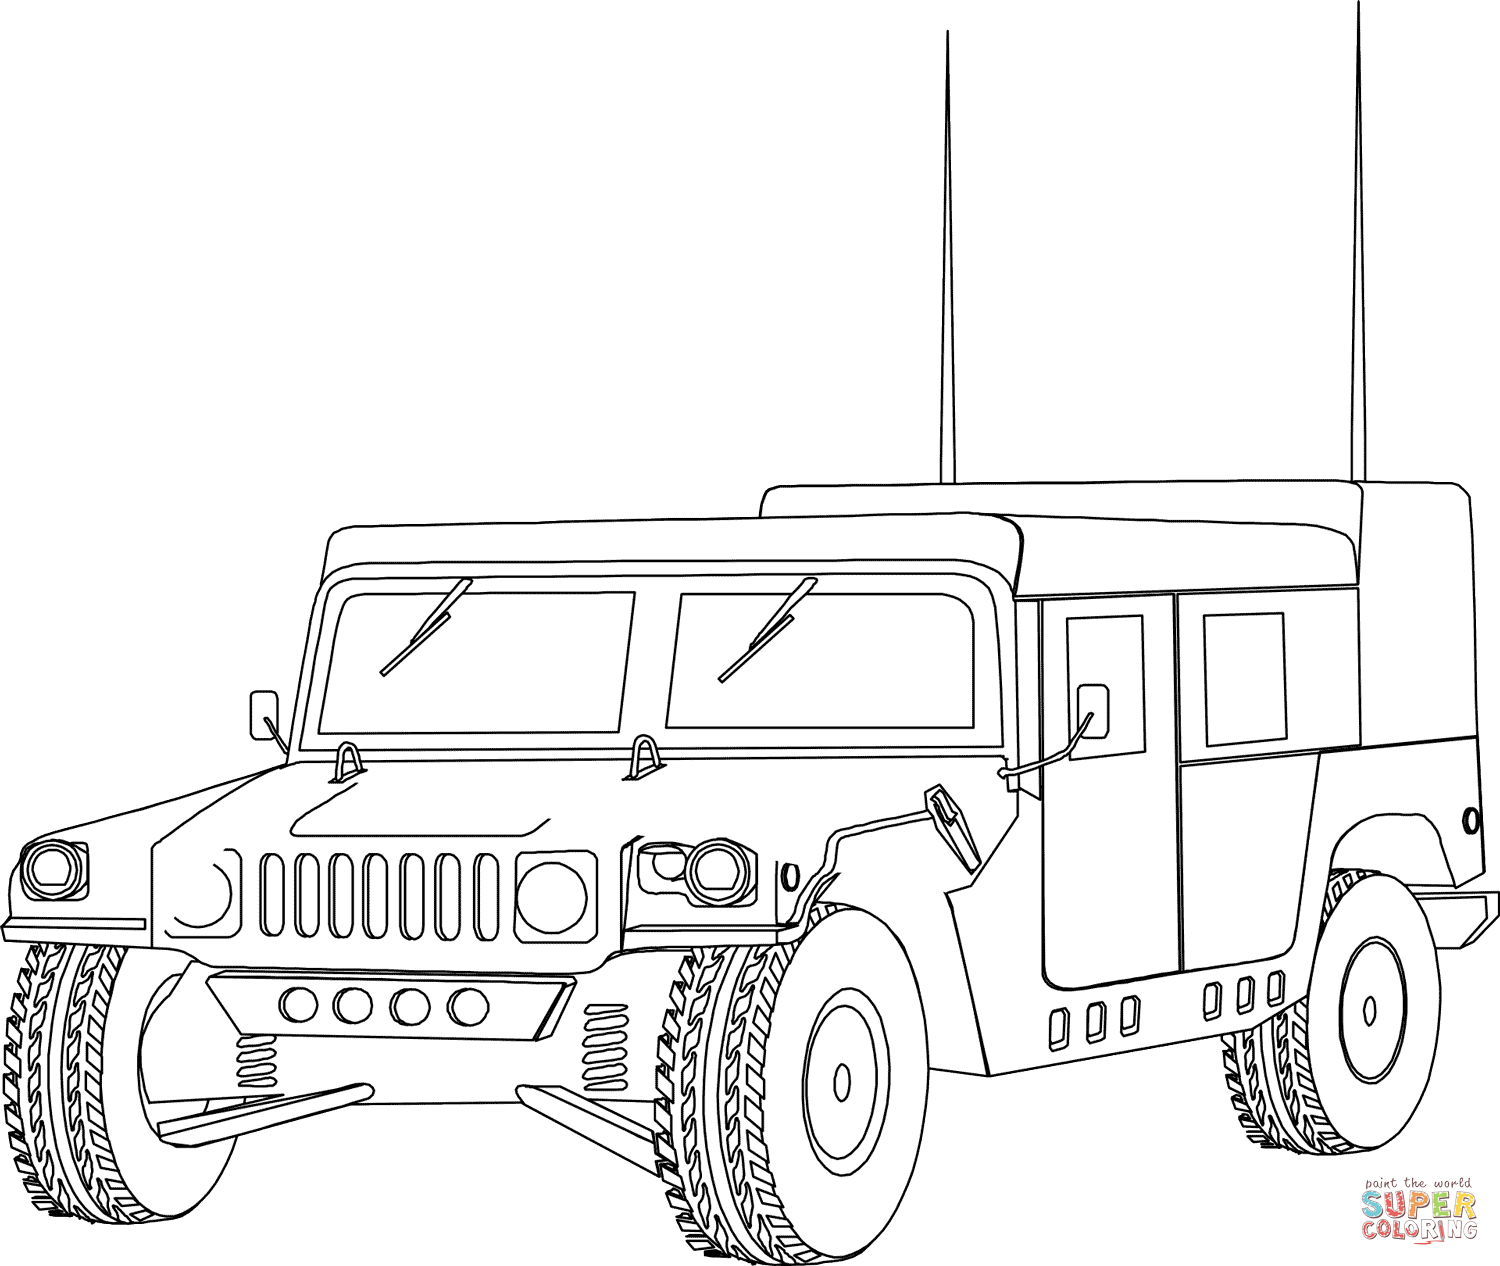 Military Supply Vehicle coloring page | Free Printable Coloring Pages